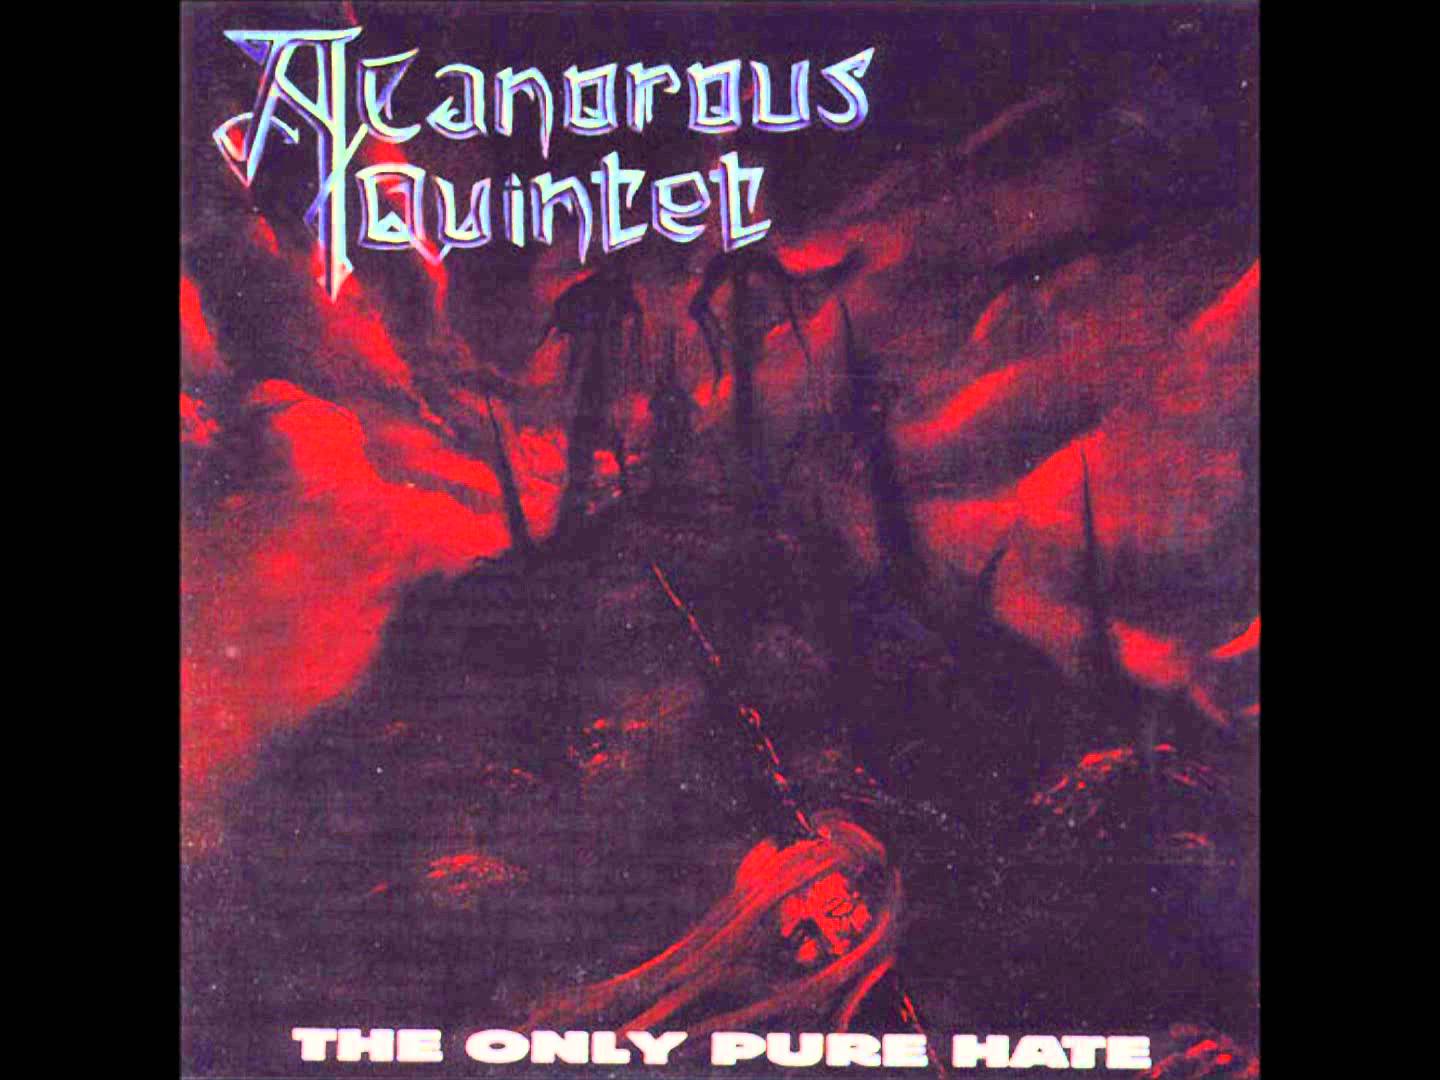 A Canorous Quintet - Land Of The Lost